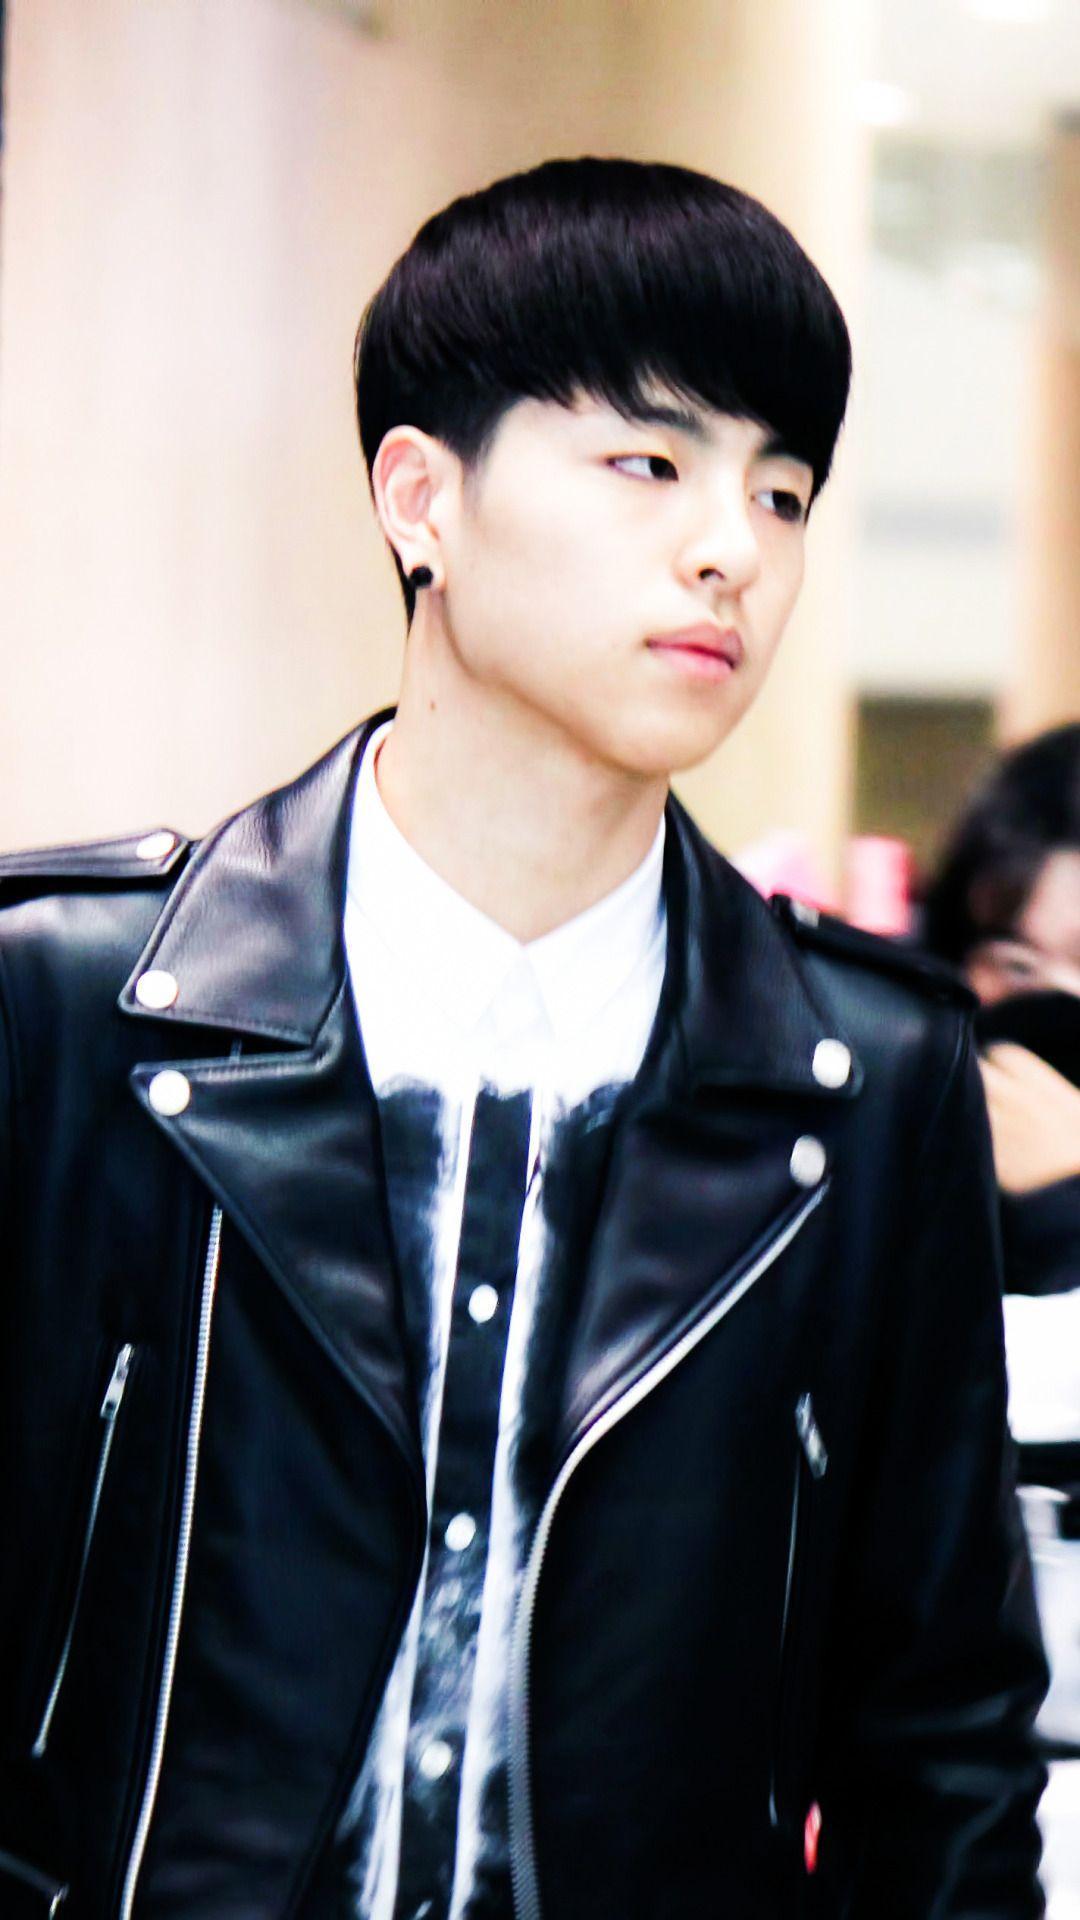 IKON B.I and Junhoe wallpaper requested